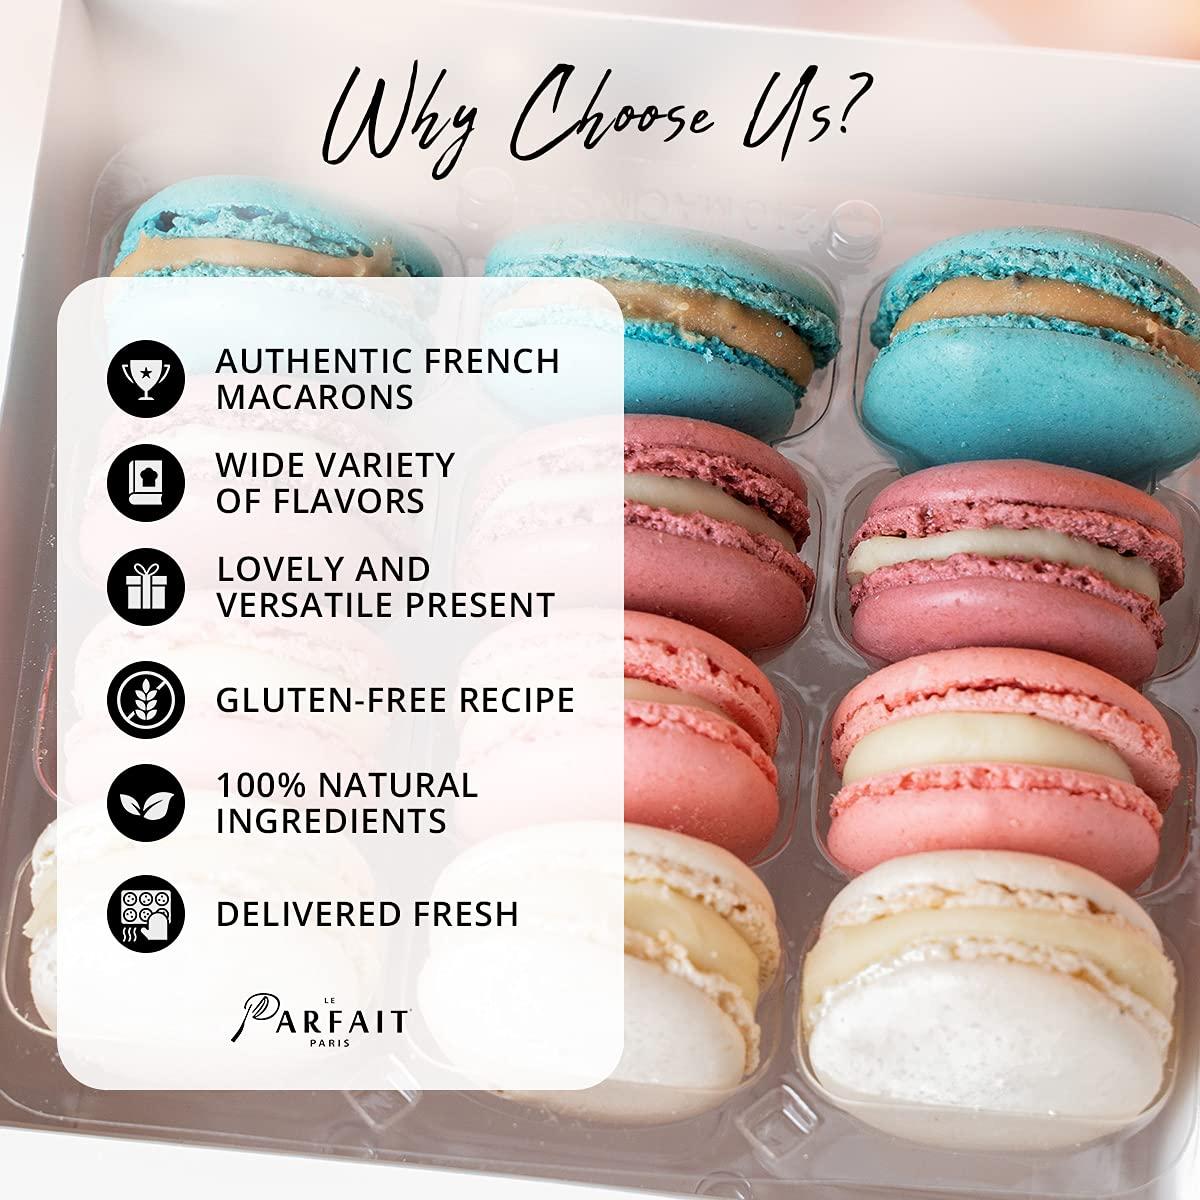 Le Parfait Paris: Garden Bloom French Macarons - Gourmet Desserts Snack Box  for Baby Shower, Birthdays, Mothers